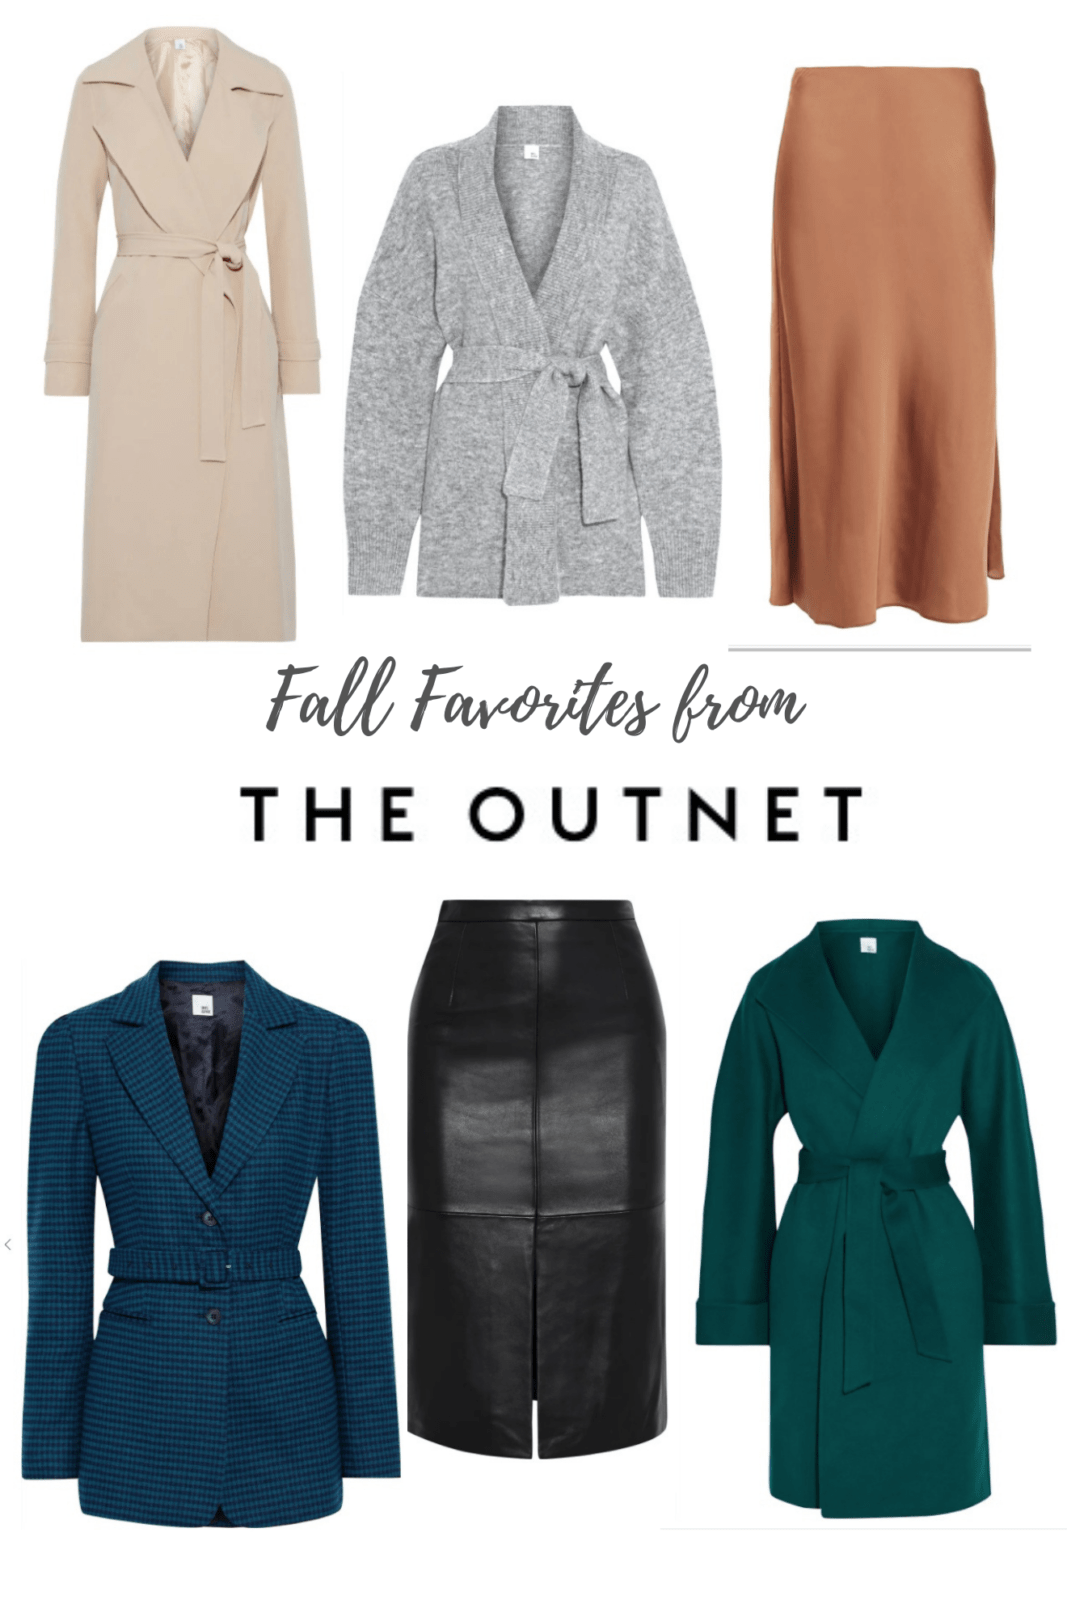 Fall Favorites from the Outnet by Fashion Blogger Laura Lily,